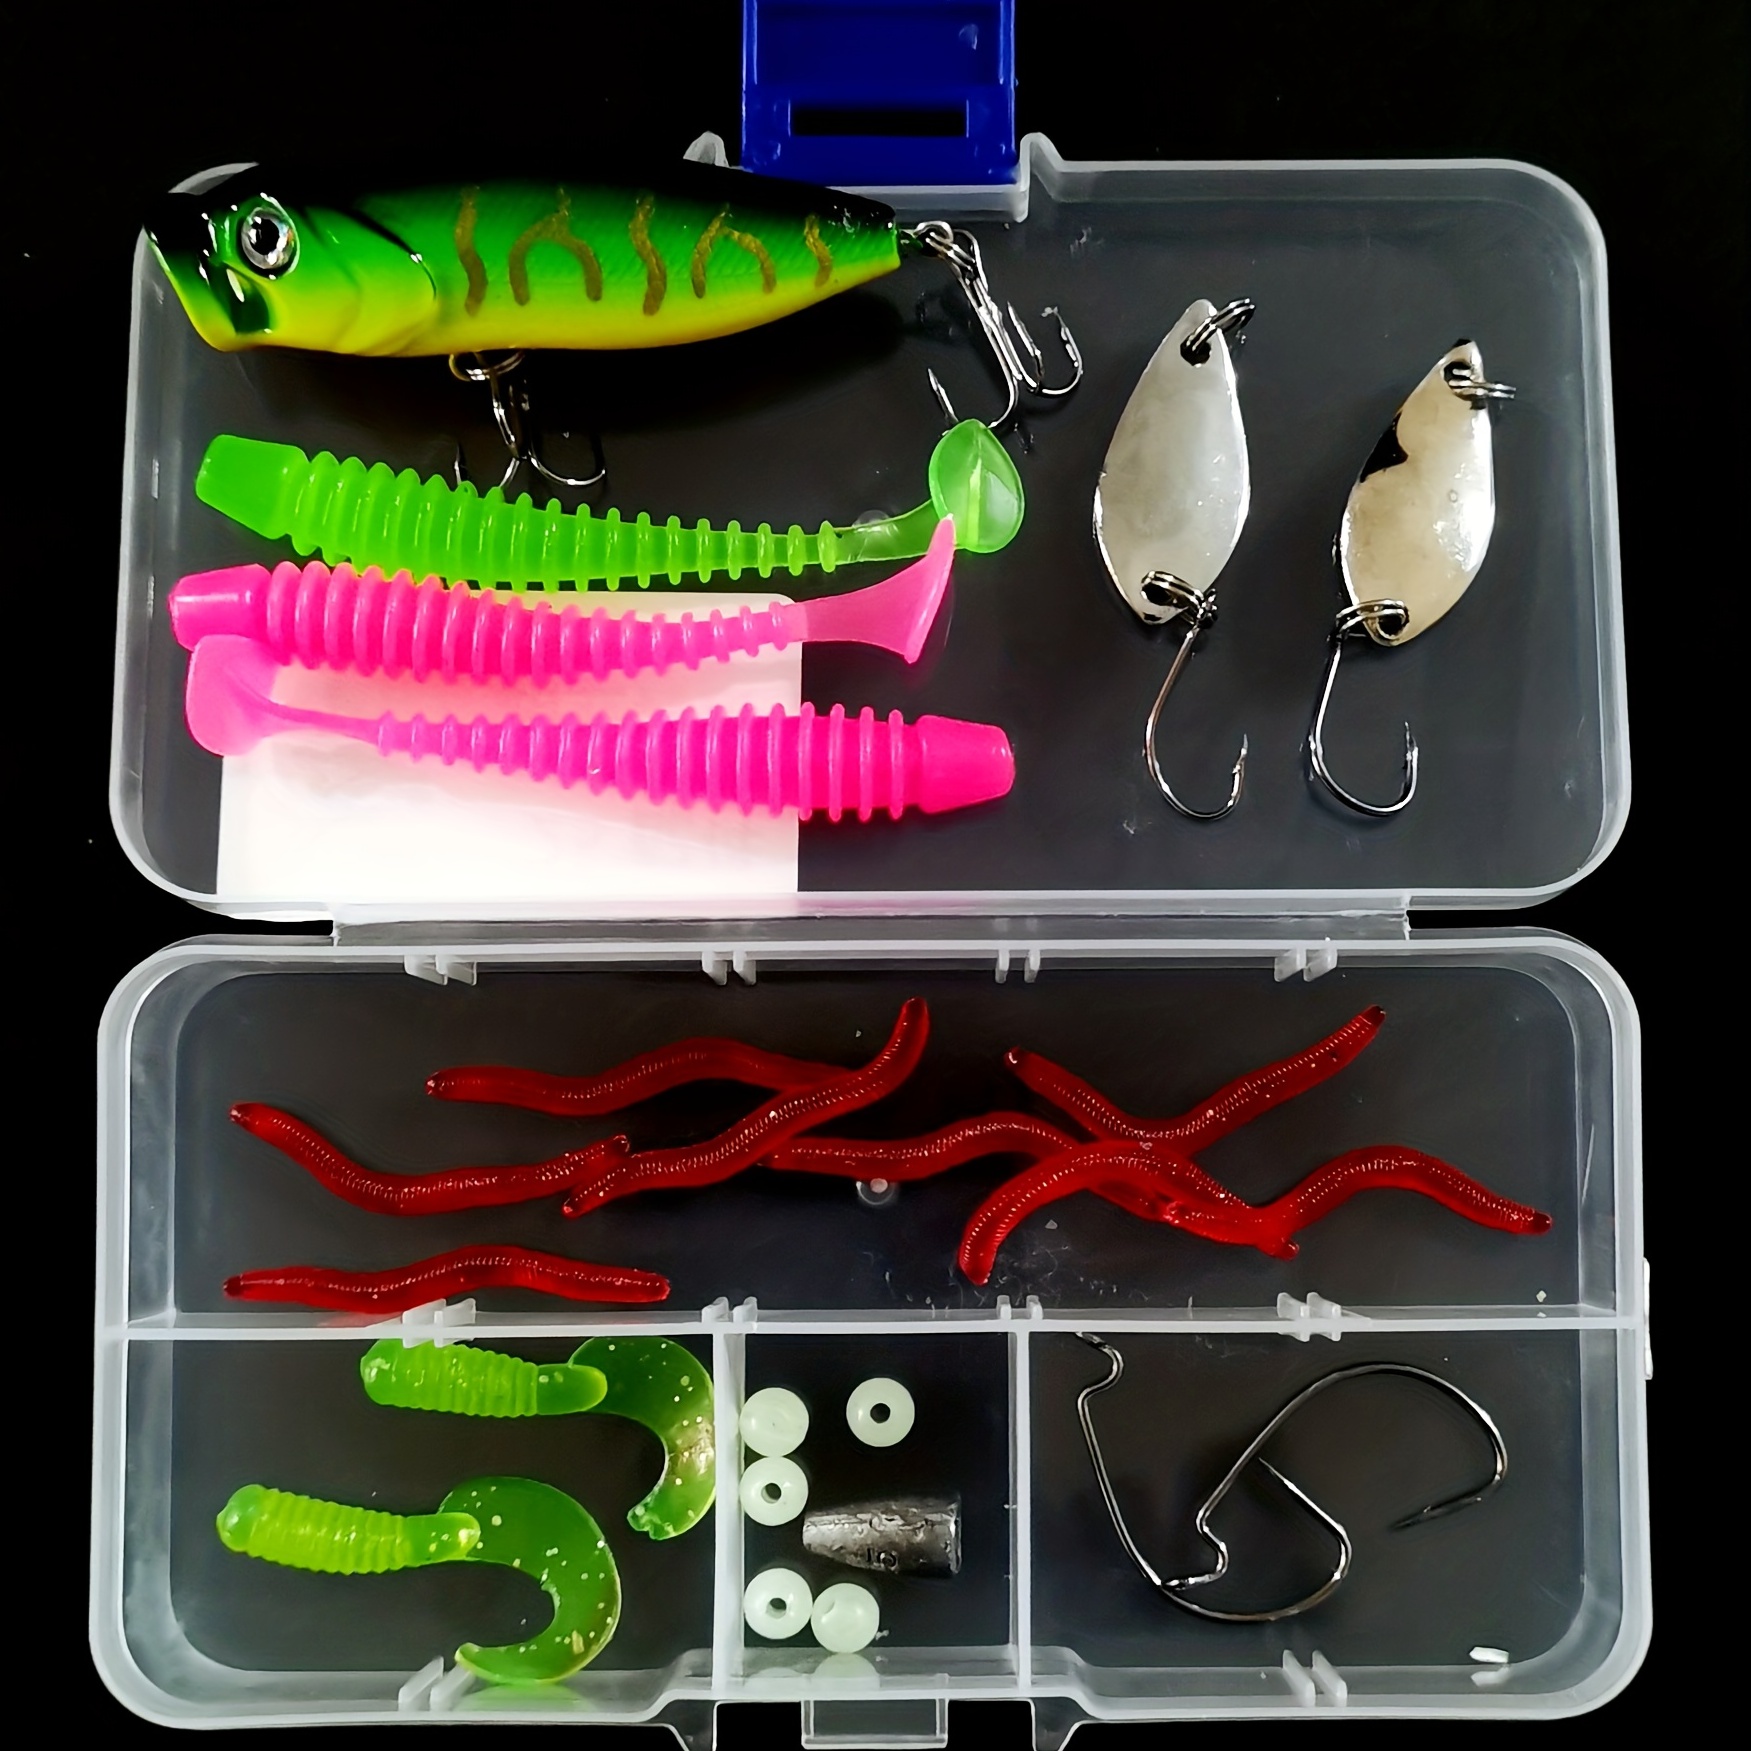 Rsenr Fishing Lures Kit - Complete Freshwater Tackle Set For Bass, Trout,  And Salmon - Includes Soft Frogs, Melon Seeds, Sequins, And Bionic Baits -  Perfect For Catching Perch And Makou Fish 